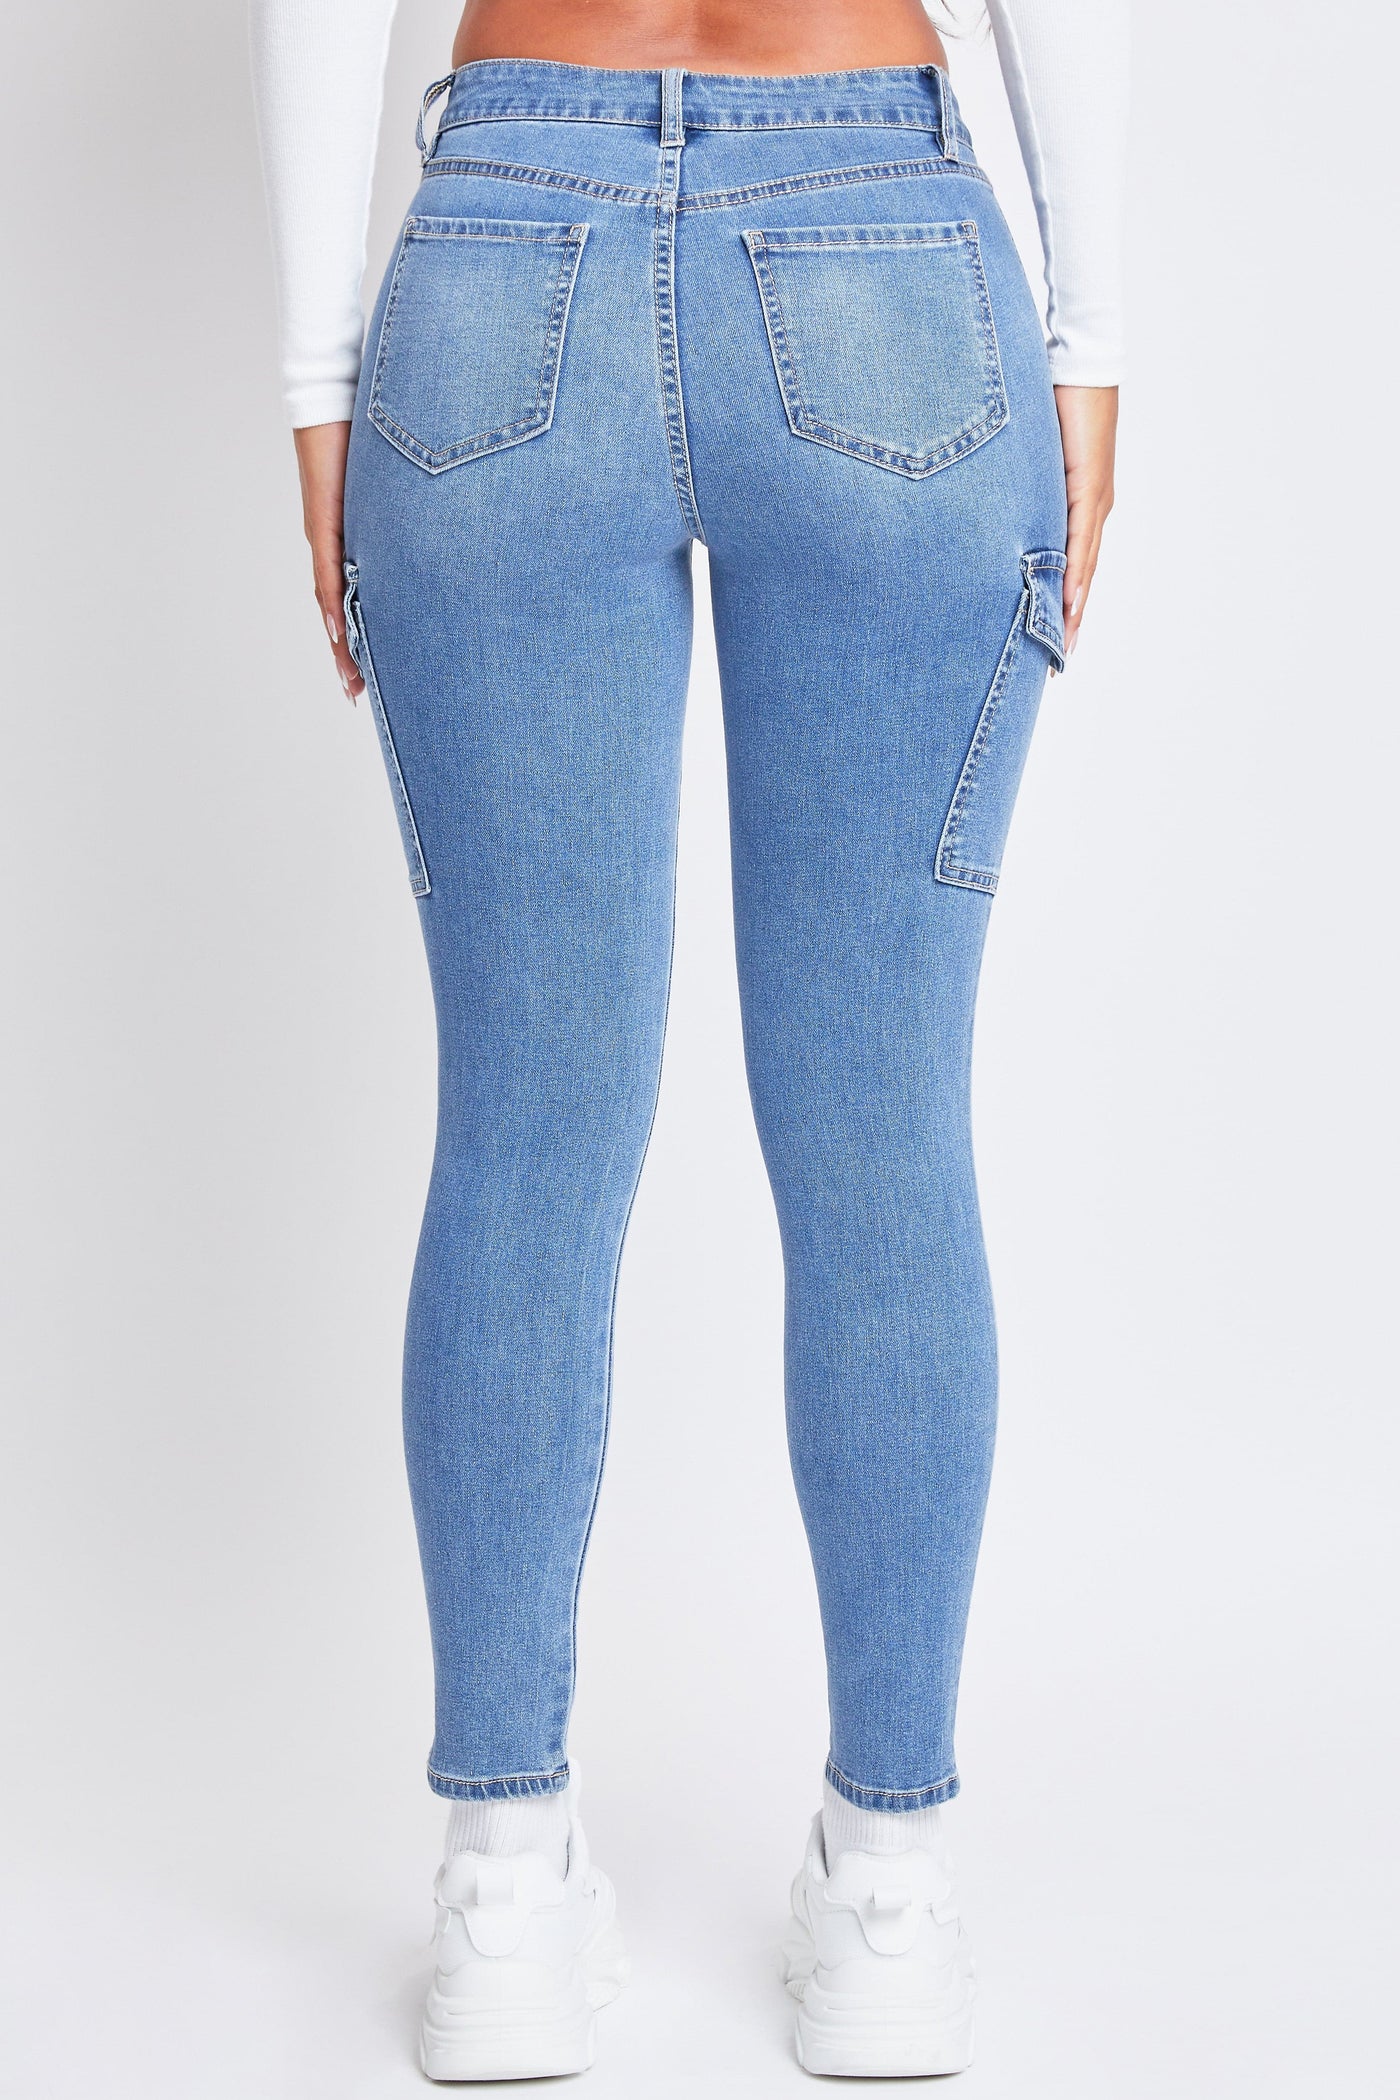 Women's Hyperdenim Mid Rise Skinny Cargo Jeans from ROYALTY – Royalty For me